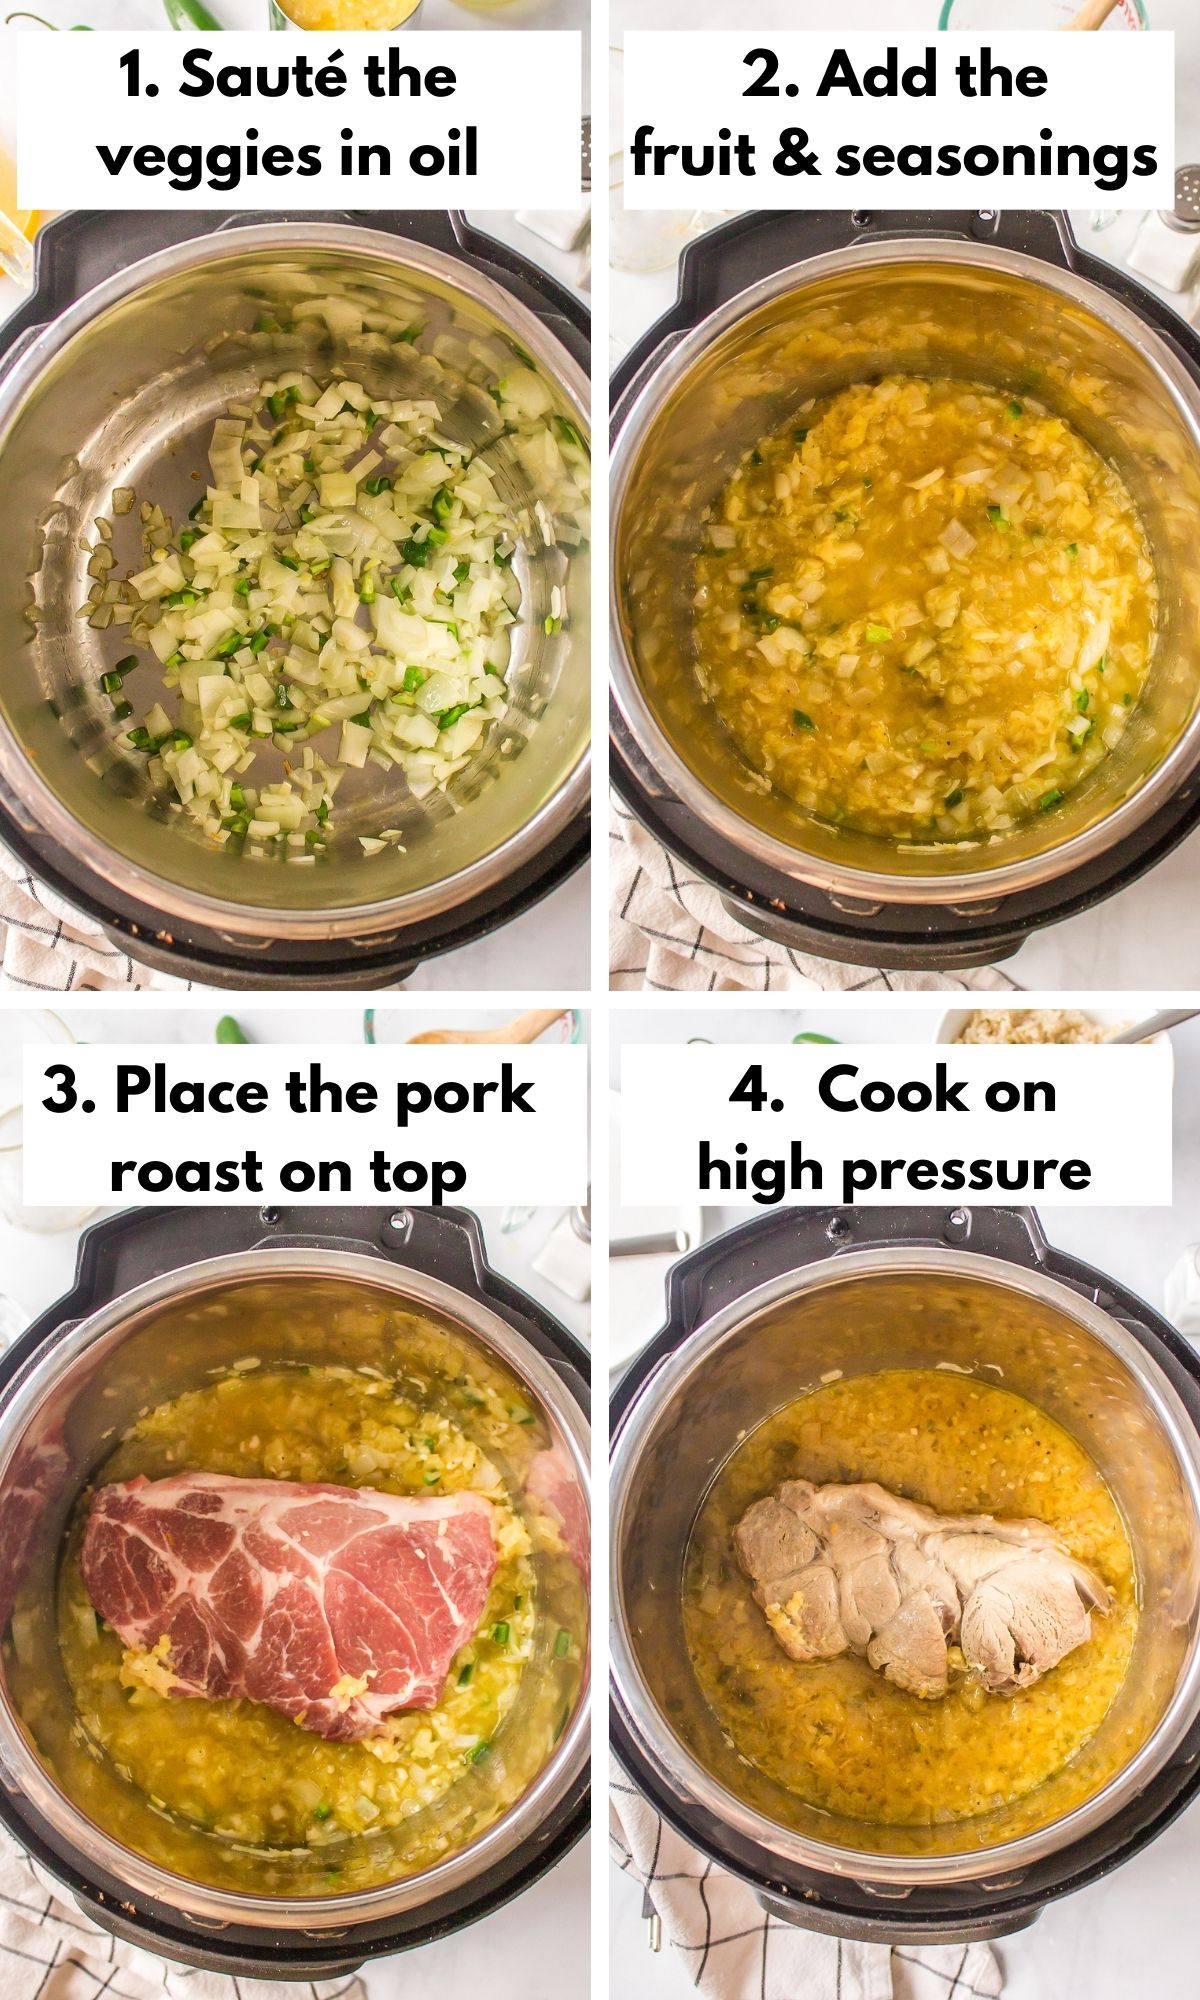 the process for cooking pork roast in the Instant Pot.